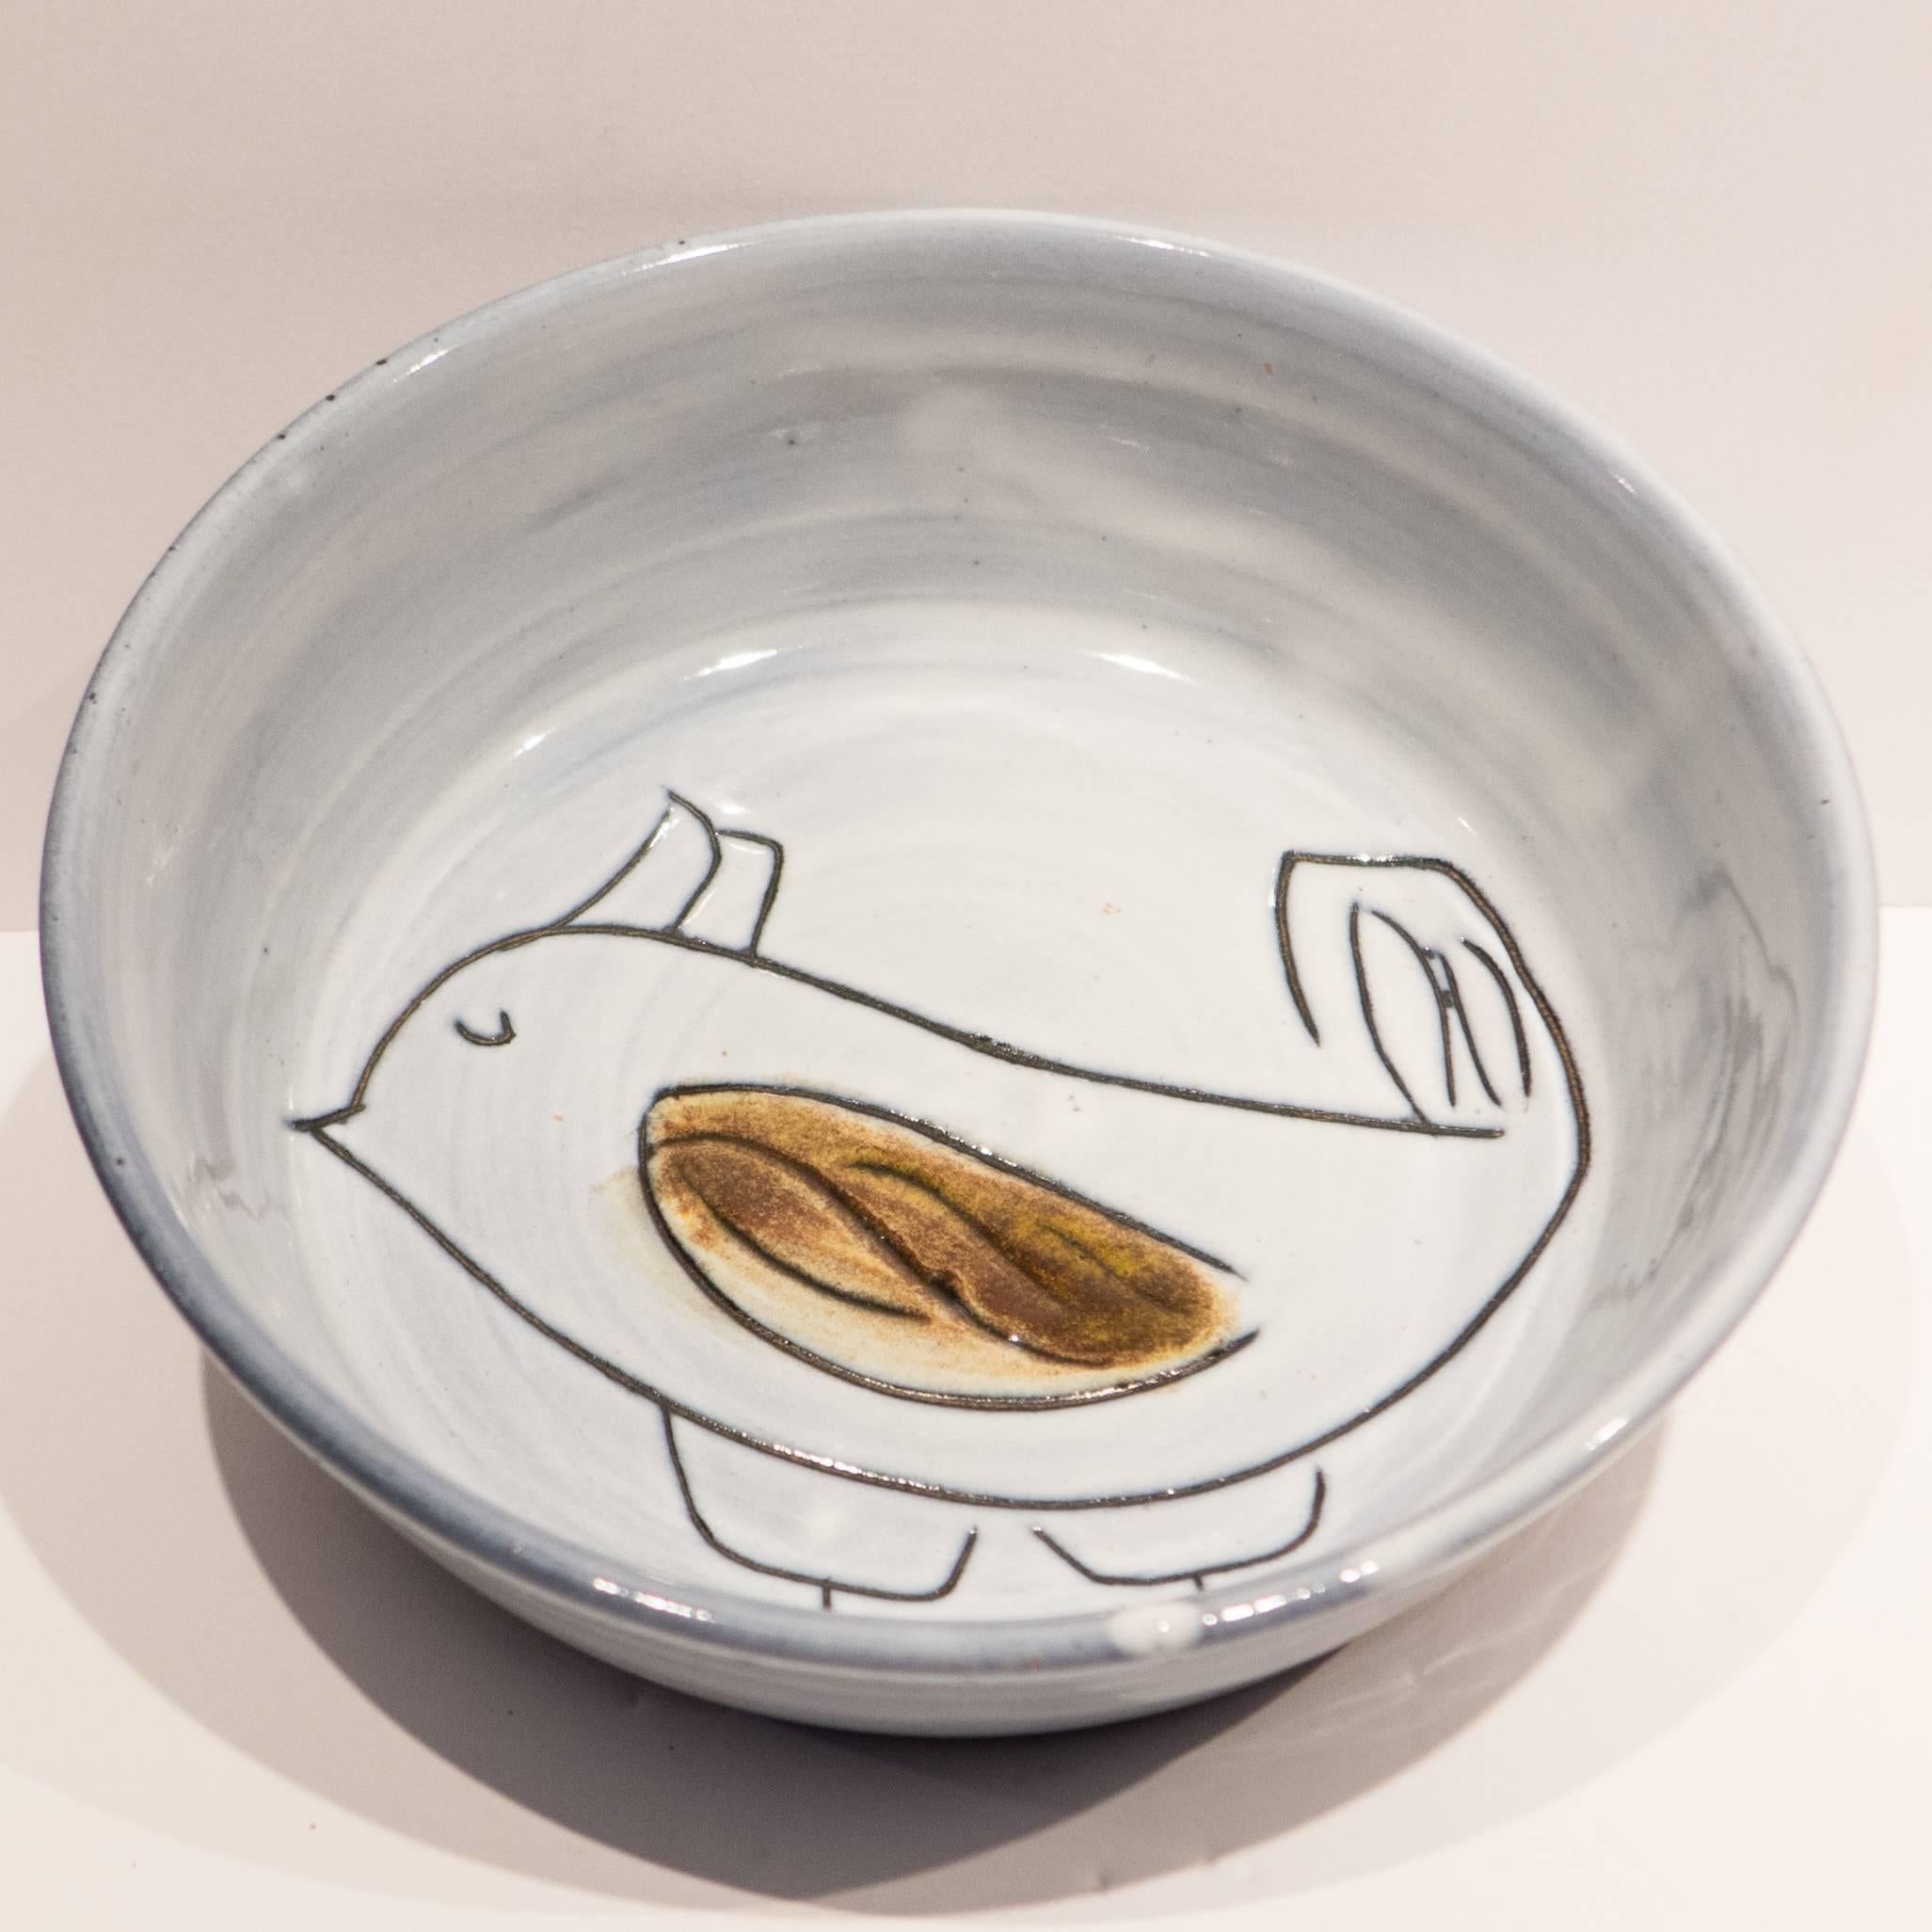 Small earthenware bowl with incised and painted abstract bird, by renowned Vallauris ceramic artist Jacques Innocenti (1926-1958). Signature to bottom.